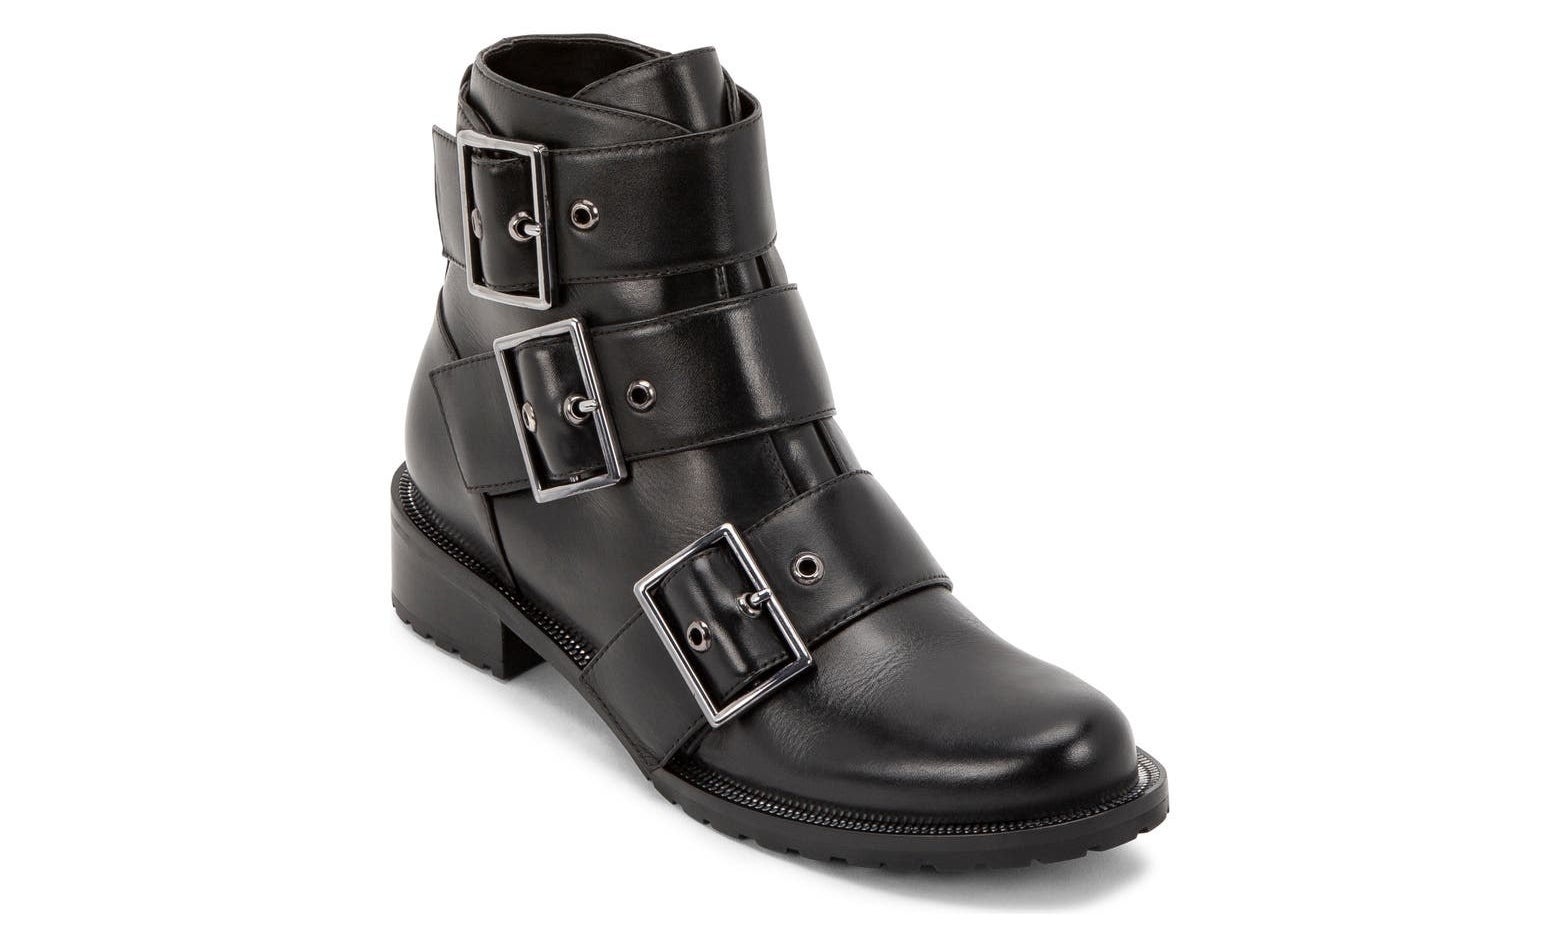 The waterproof boots styled with buckled straps, a lug sole and zipper teeth in the welt